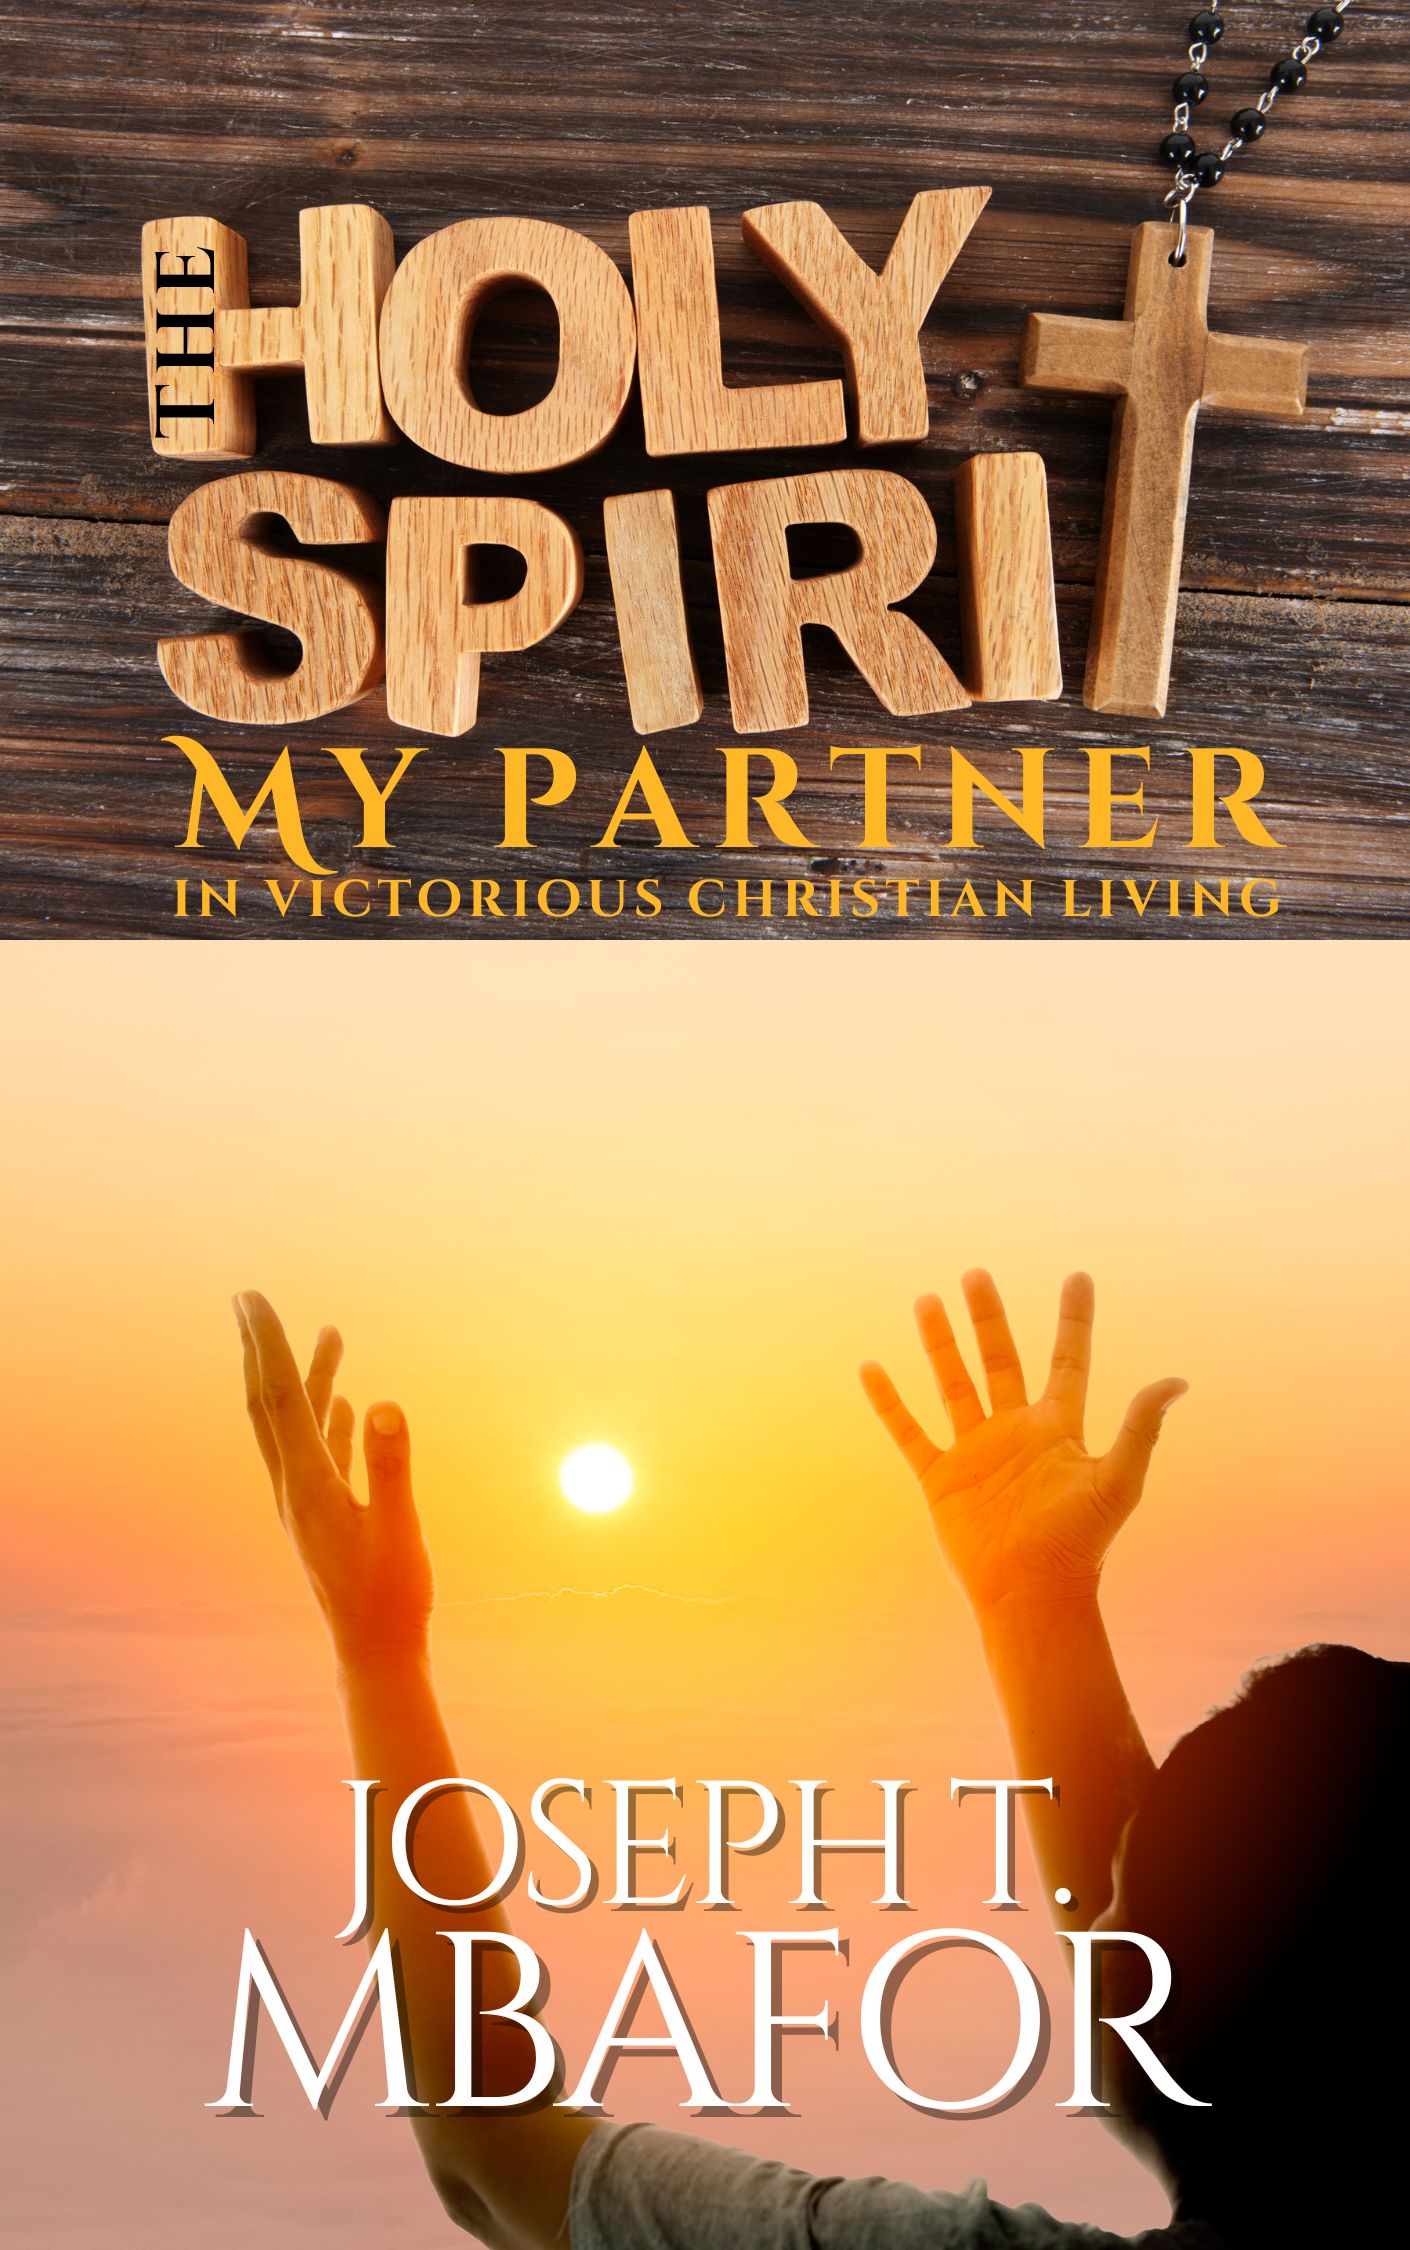 THE HOLY SPIRIT MY PARTNER IN VICTORIOUS CHRISTIAN LIVING